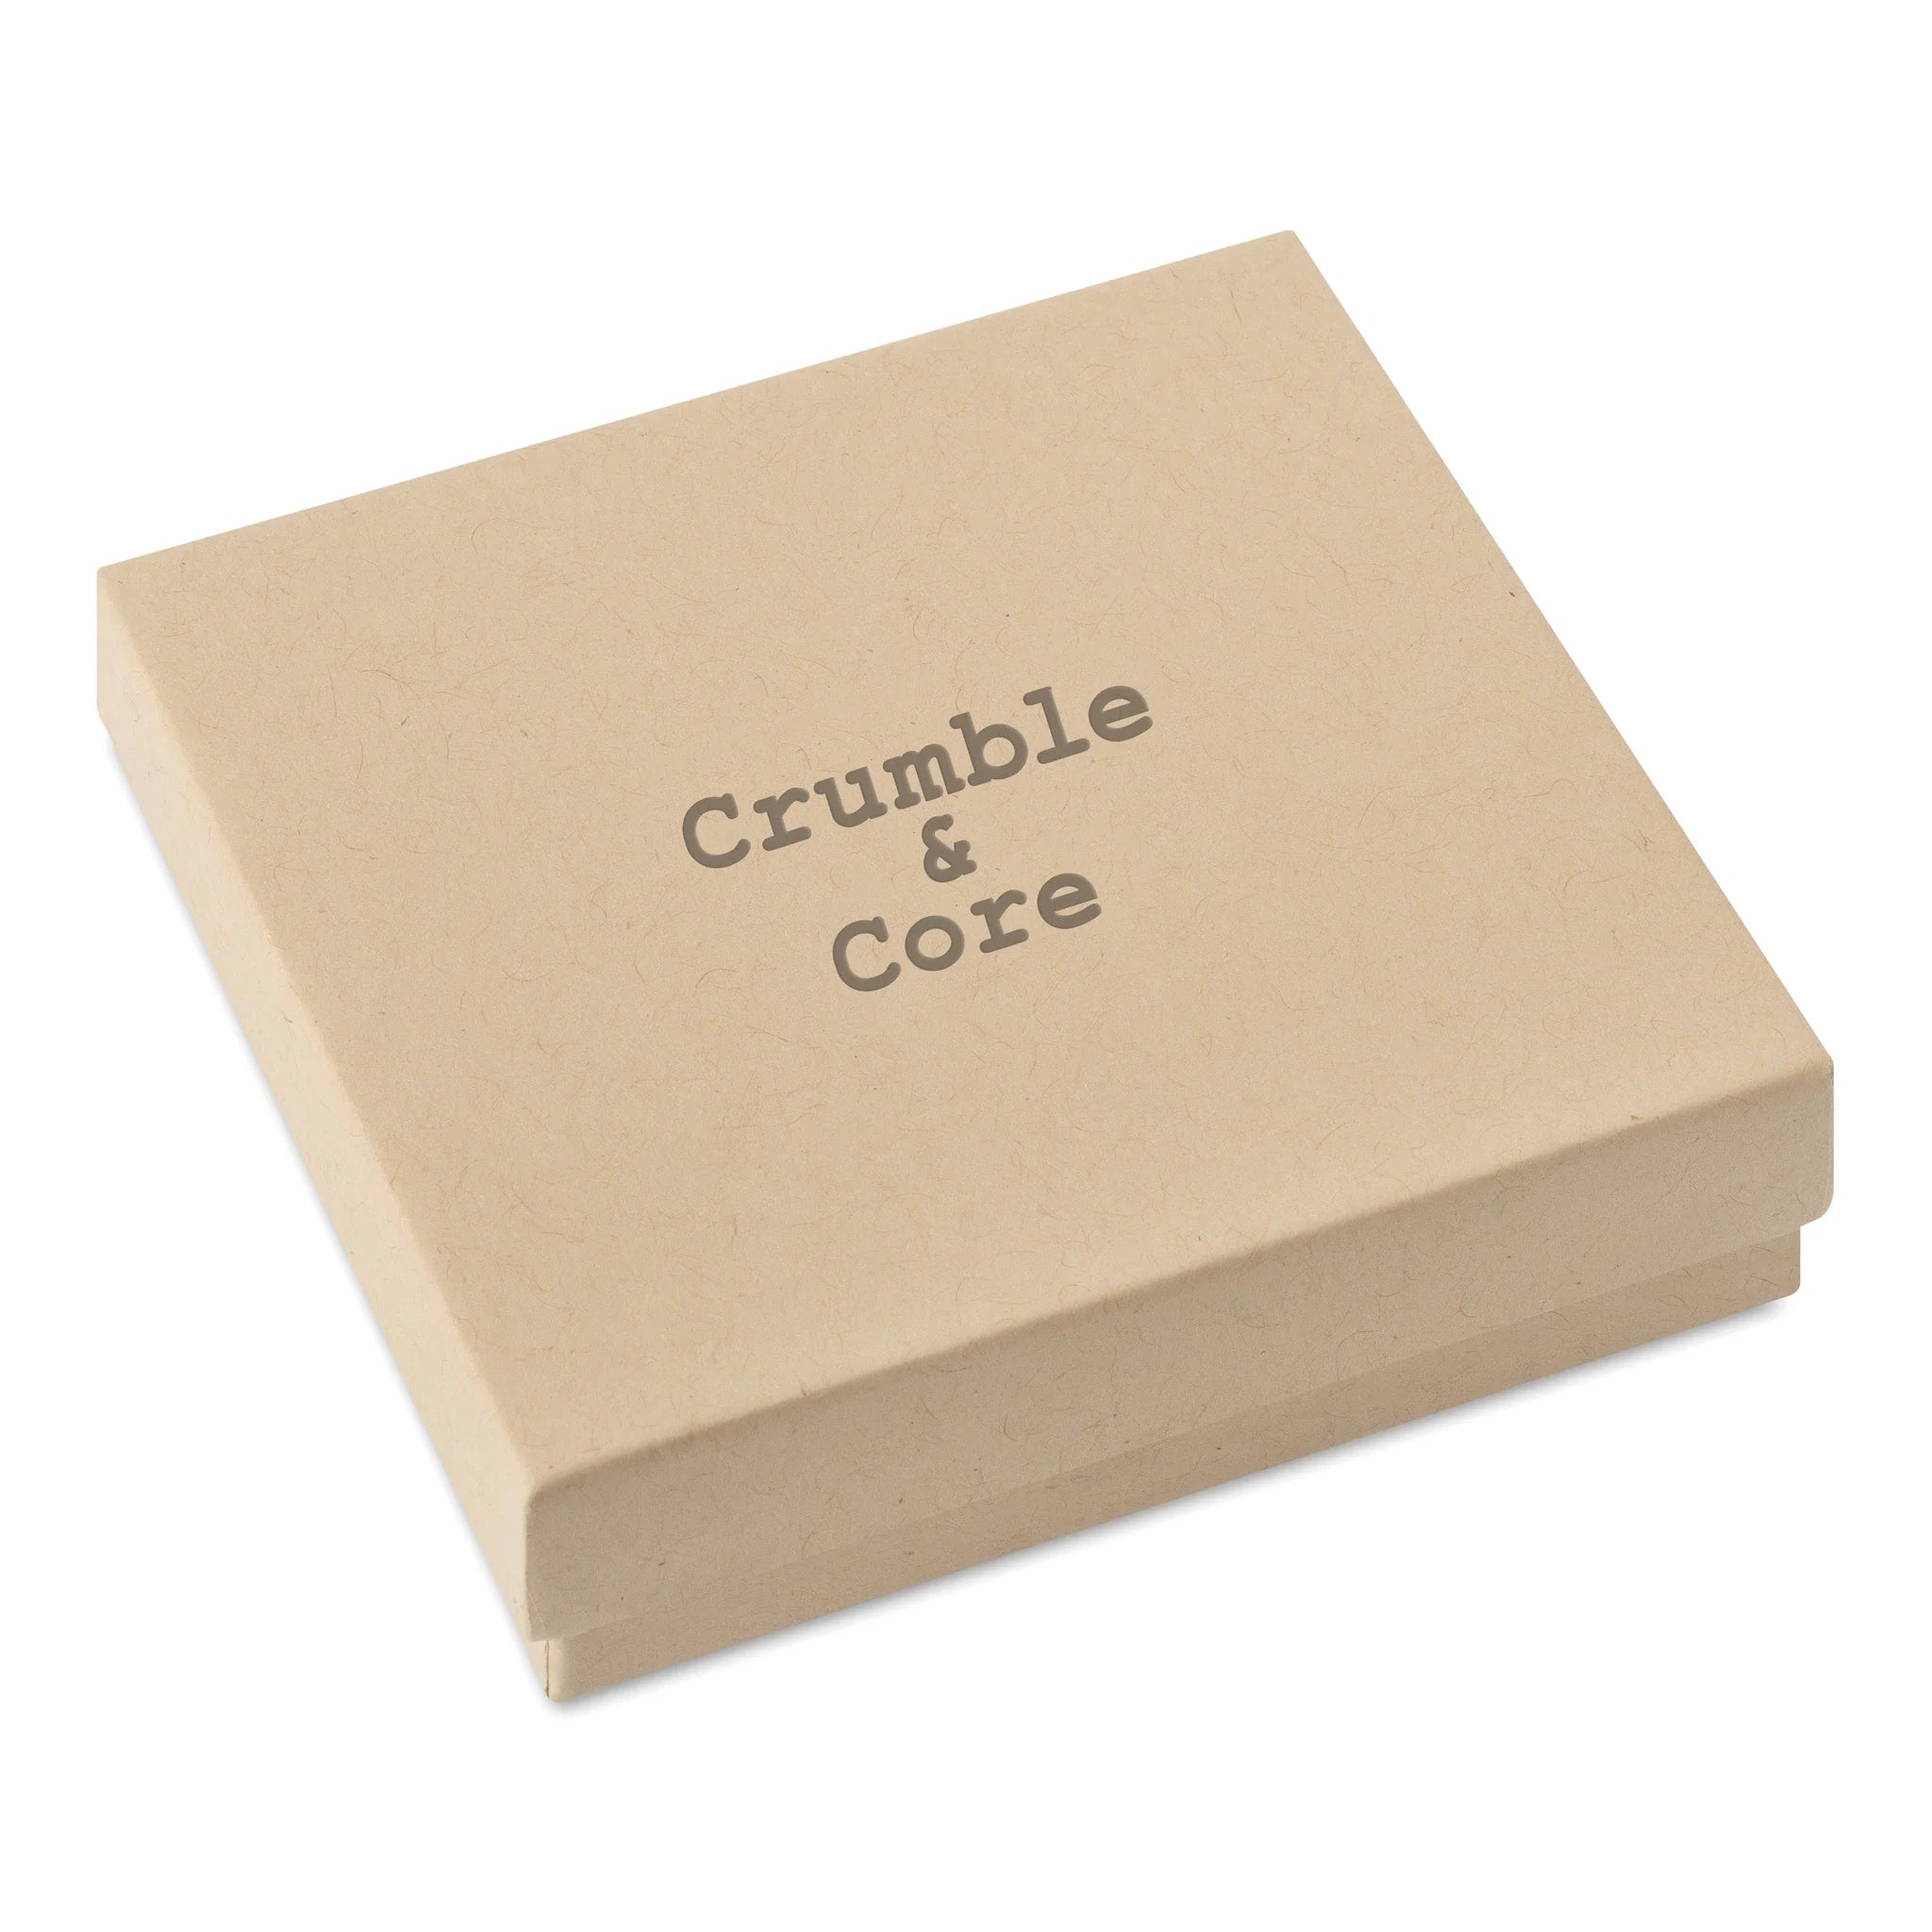 Crumble & Core  Bee Lucky Card with Earrings in a White Box by Weirs of Baggot Street